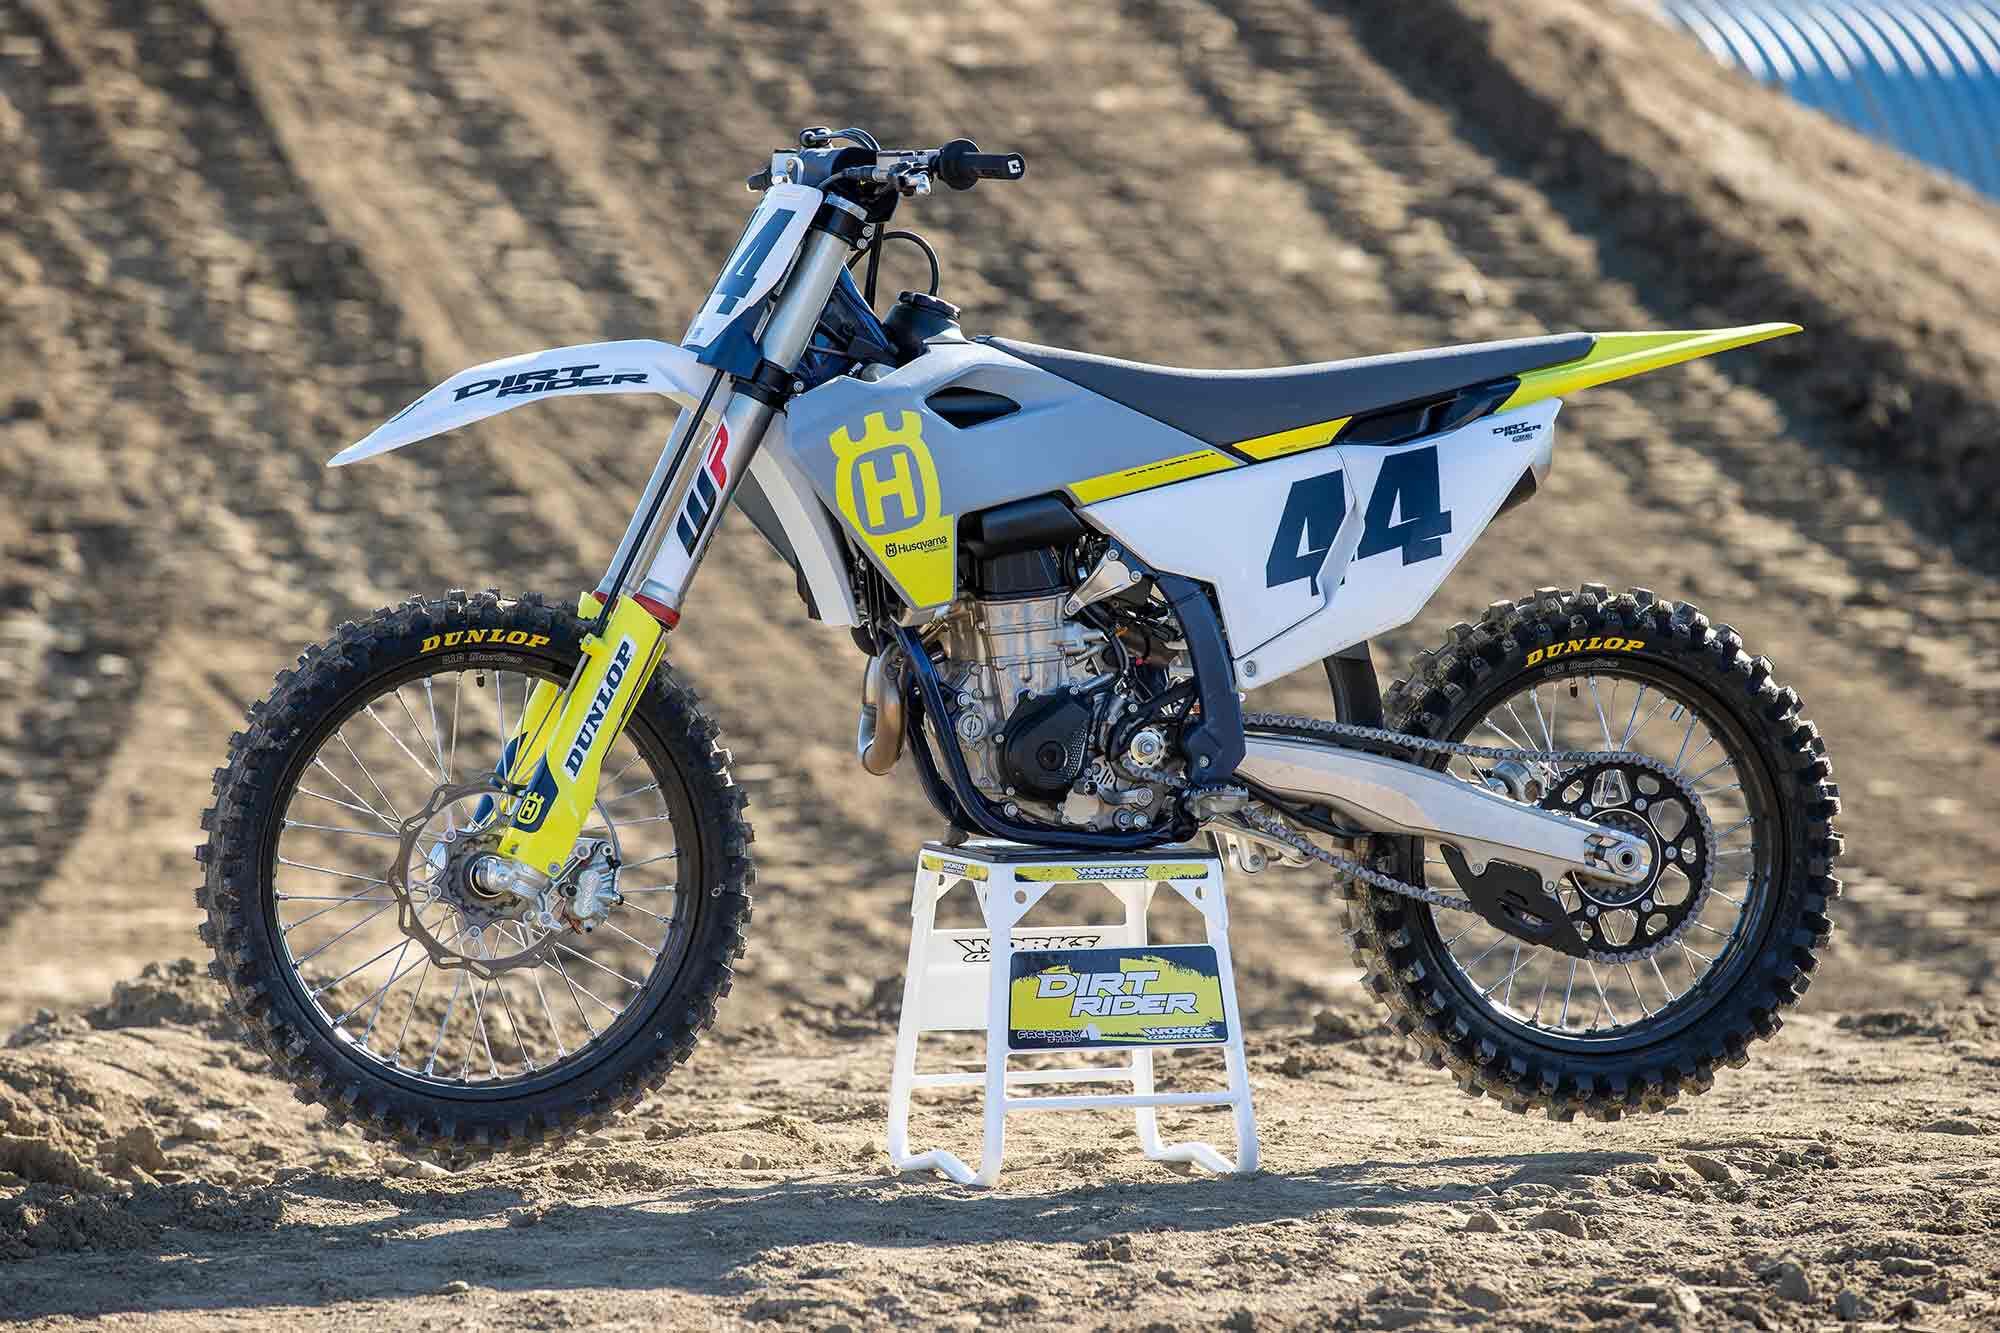 Husqvarna’s full-size motocross bikes gained weight over the previous-generation (2019–2022) models. The FC 450 weighs 240 pounds wet on the <i>Dirt Rider</i> scales, which is 5 pounds more than last year.